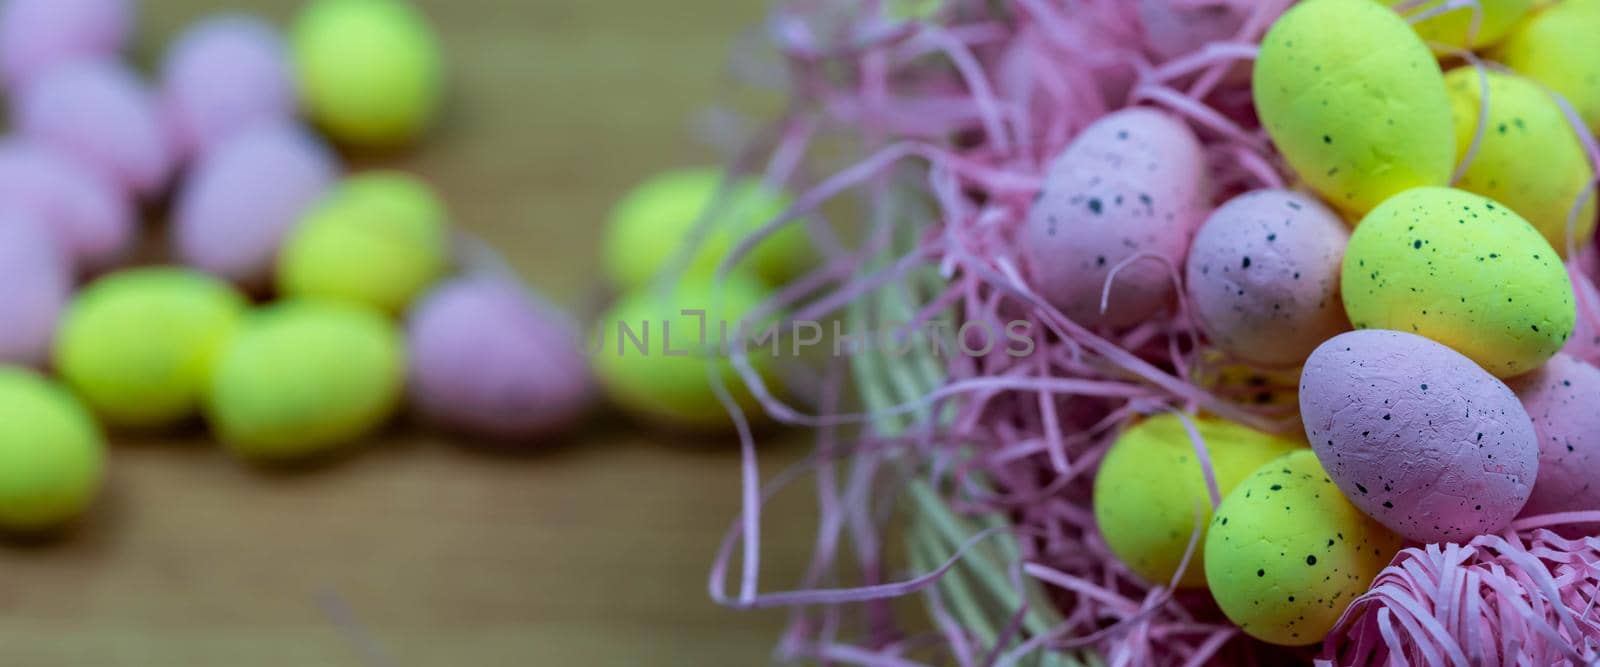 Colorful Yellow and Pink easter egg with freckle patterns on wooden table with copy space. Pink and Yellow easter egg inside a basket by billroque